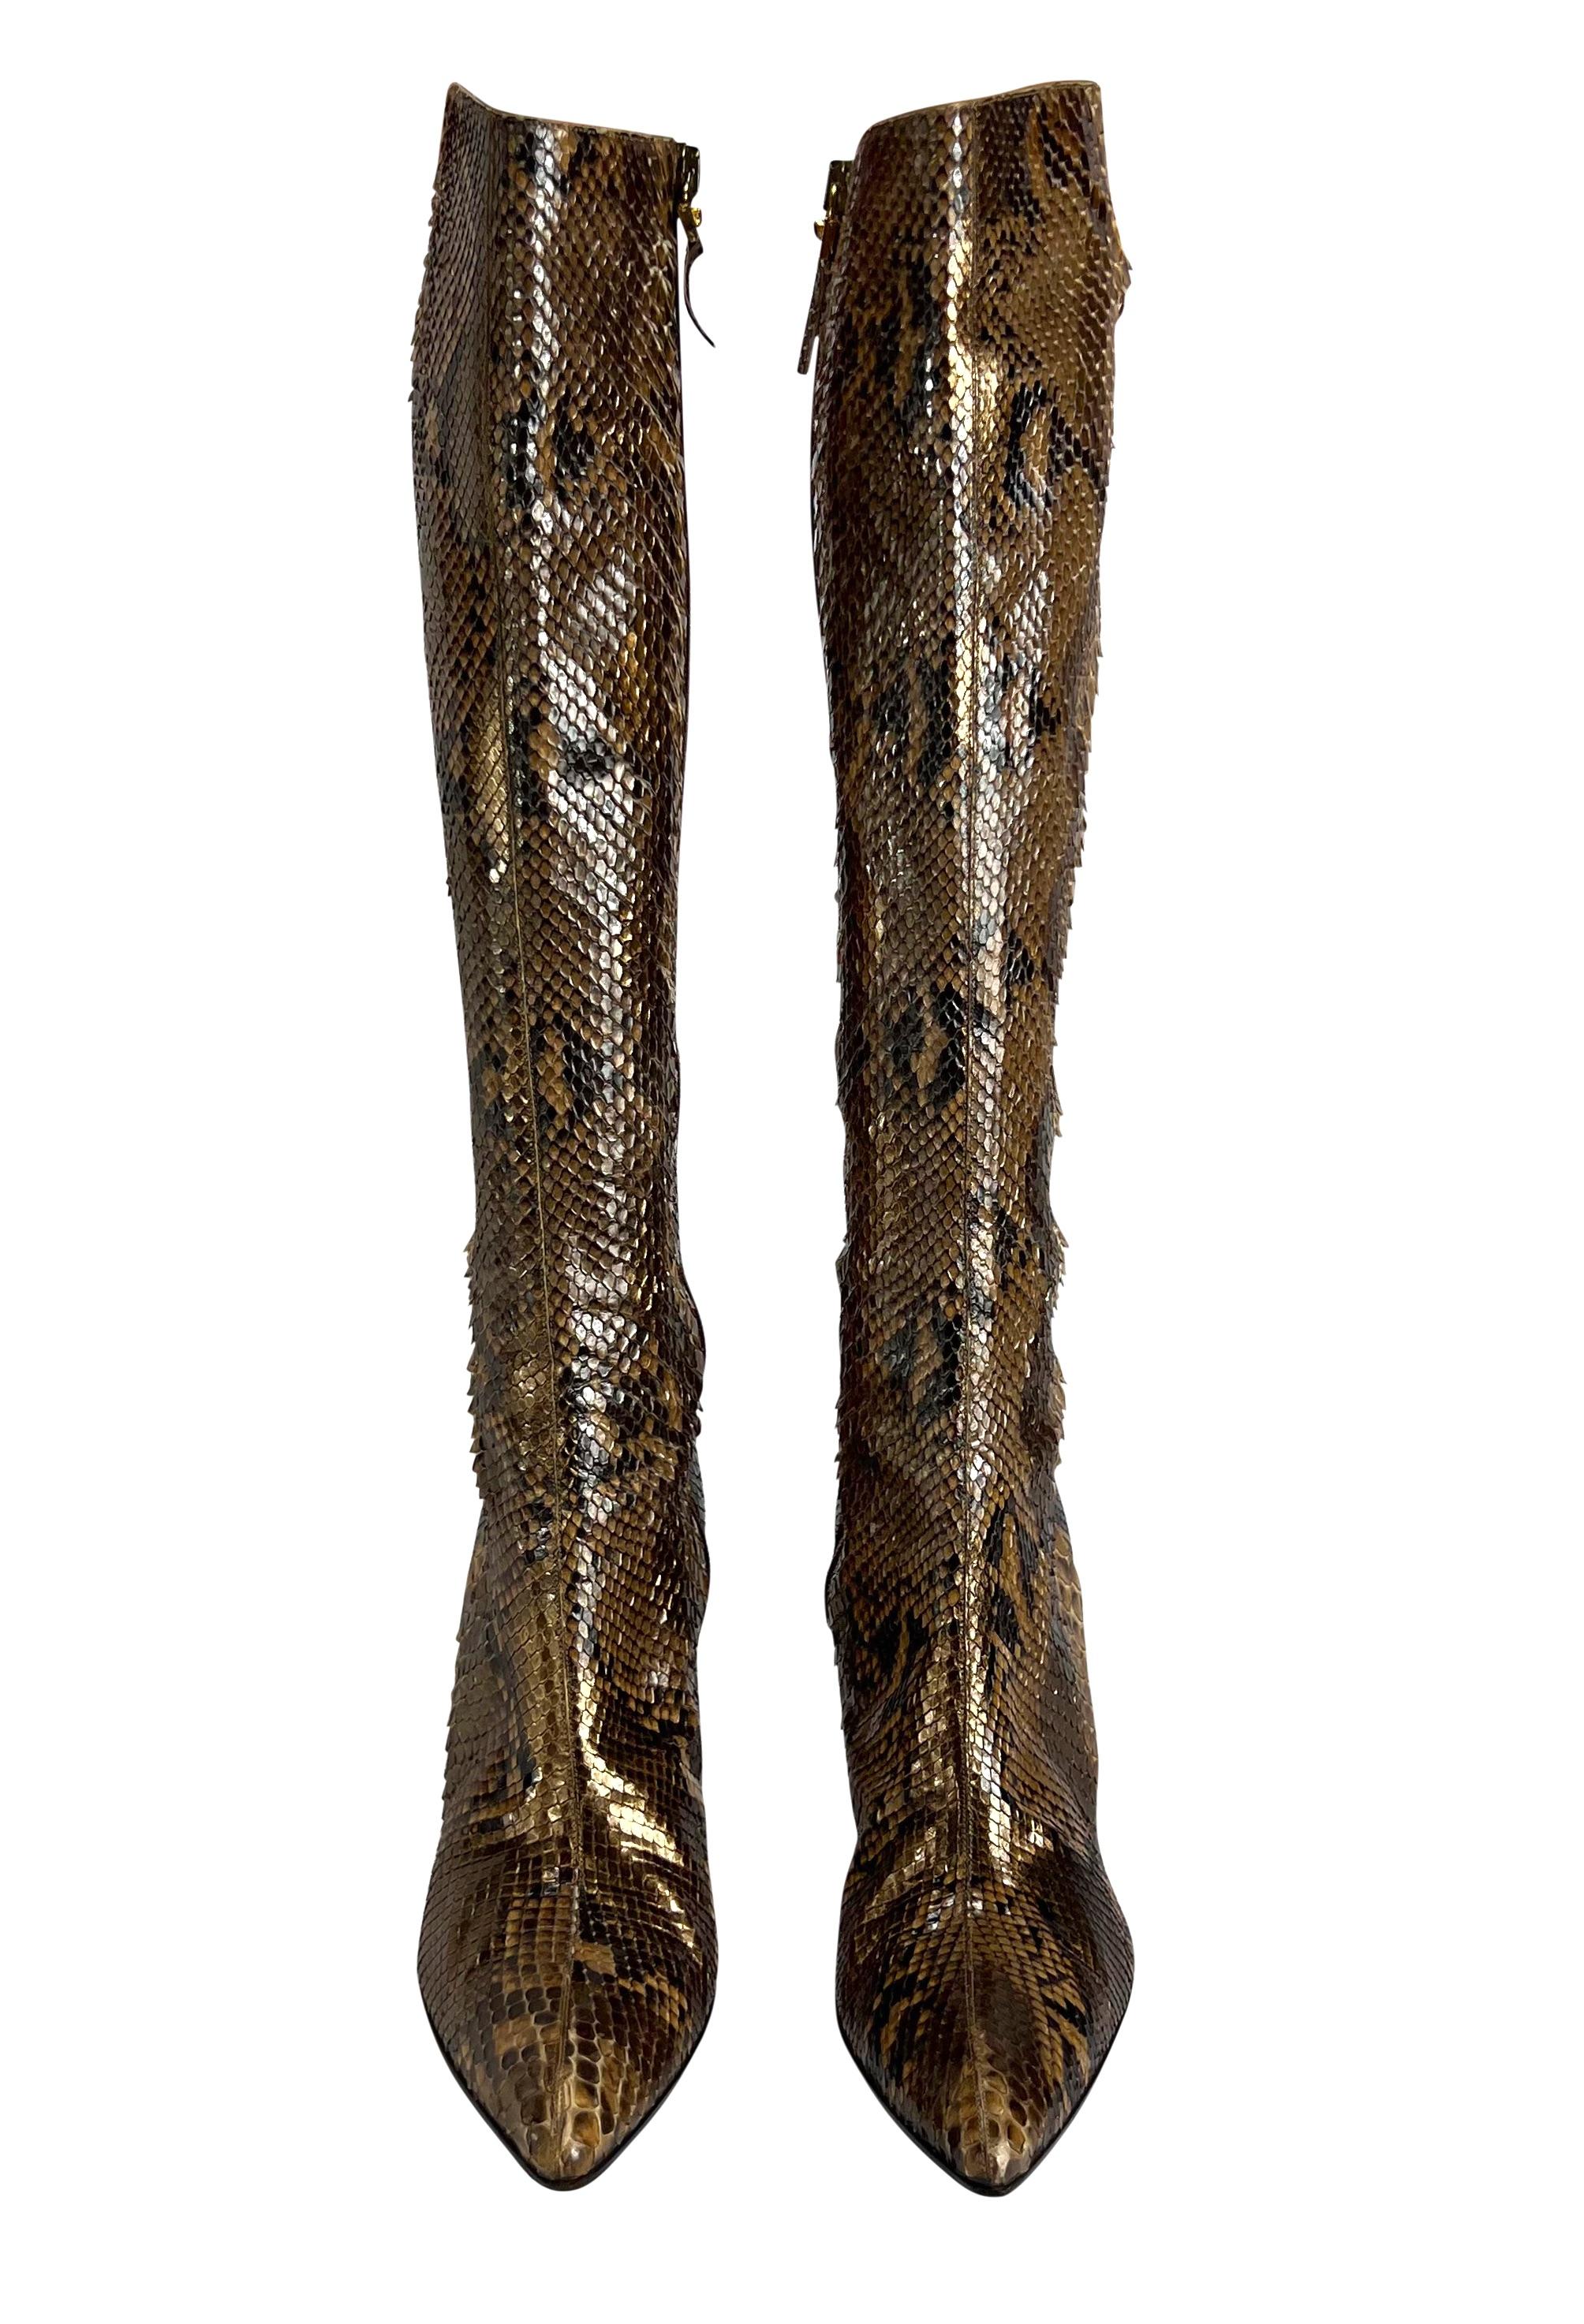 F/W 1999 Gianni Versace by Donatella Metallic Python Heel Boots Size 37 For Sale 1